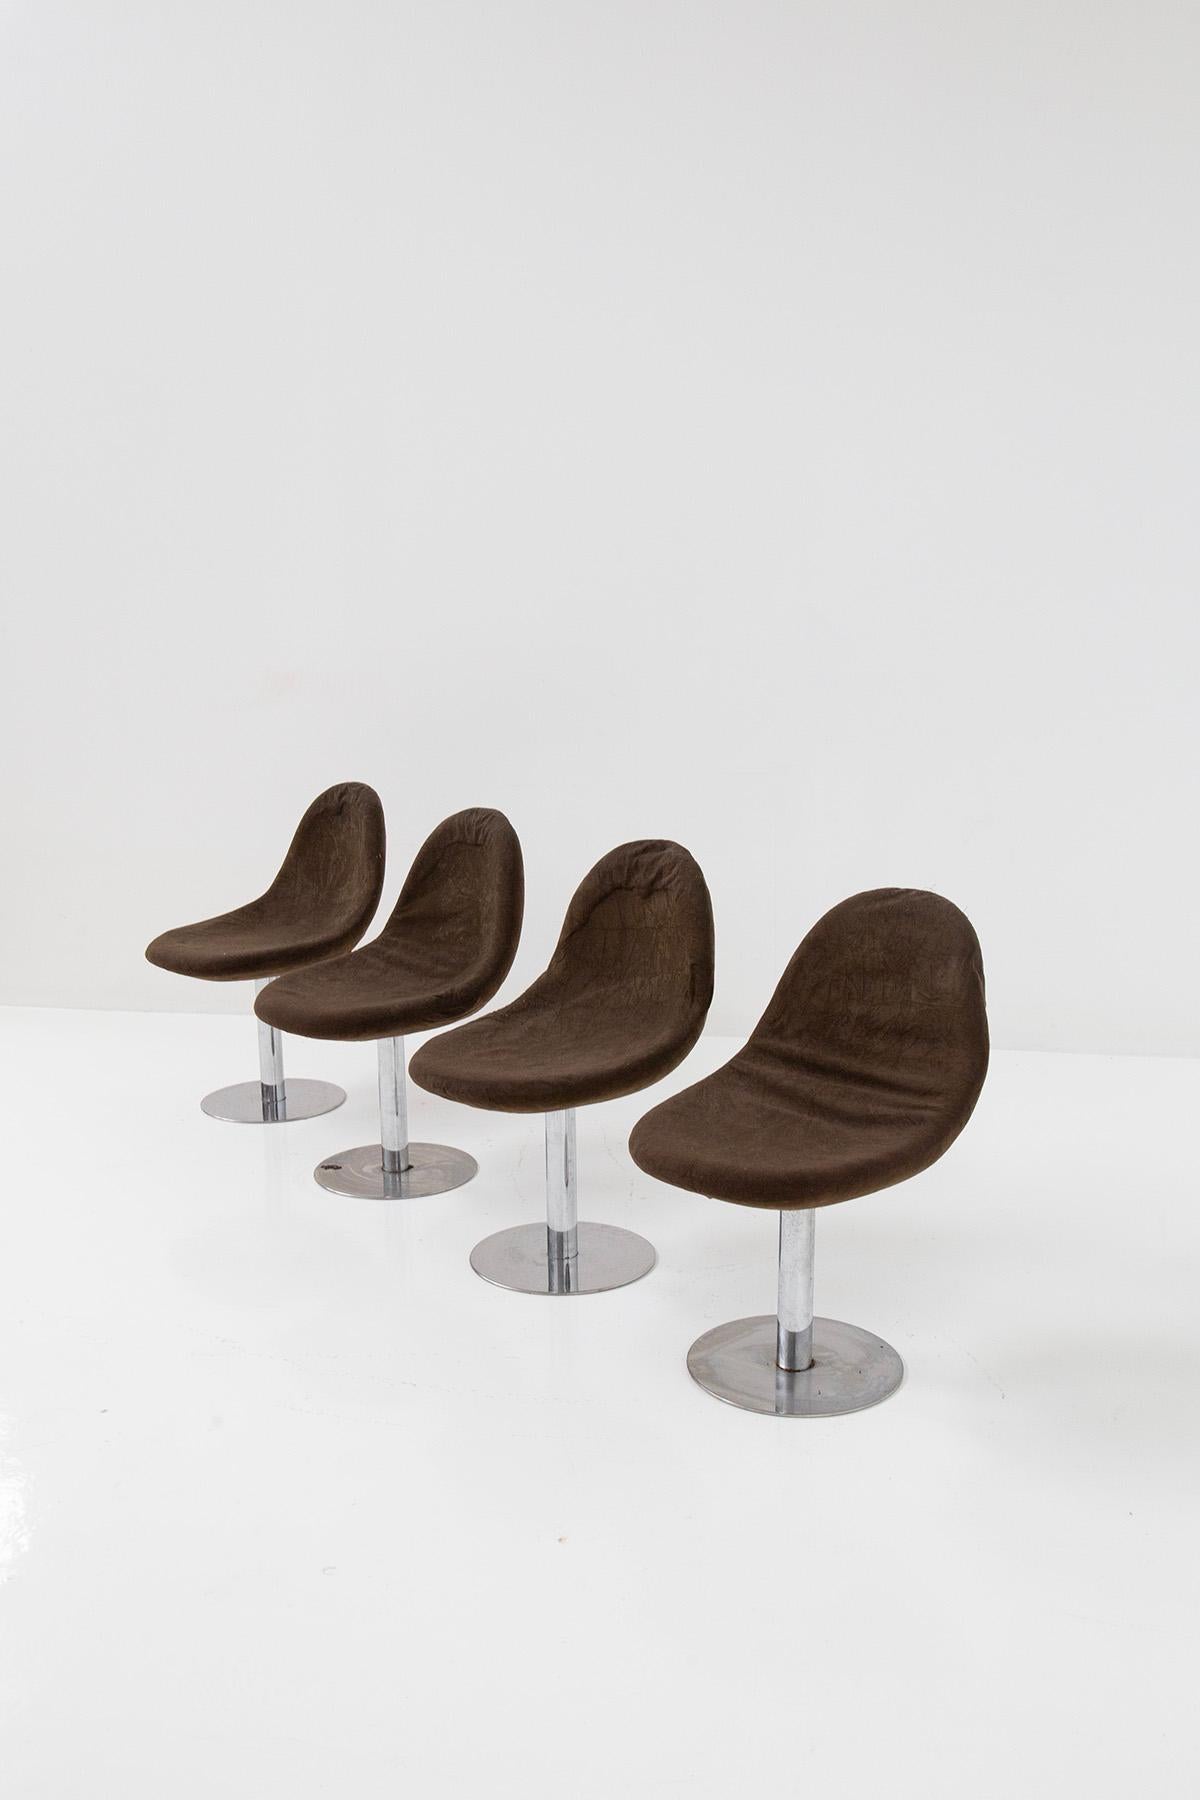 Set of four Space Age Italian chairs dating back to the 1970s is up for grabs. These chairs embody the iconic and enduring Space Age design, epitomizing the era's futuristic aesthetic. Crafted from durable tubular metal, each chair features a